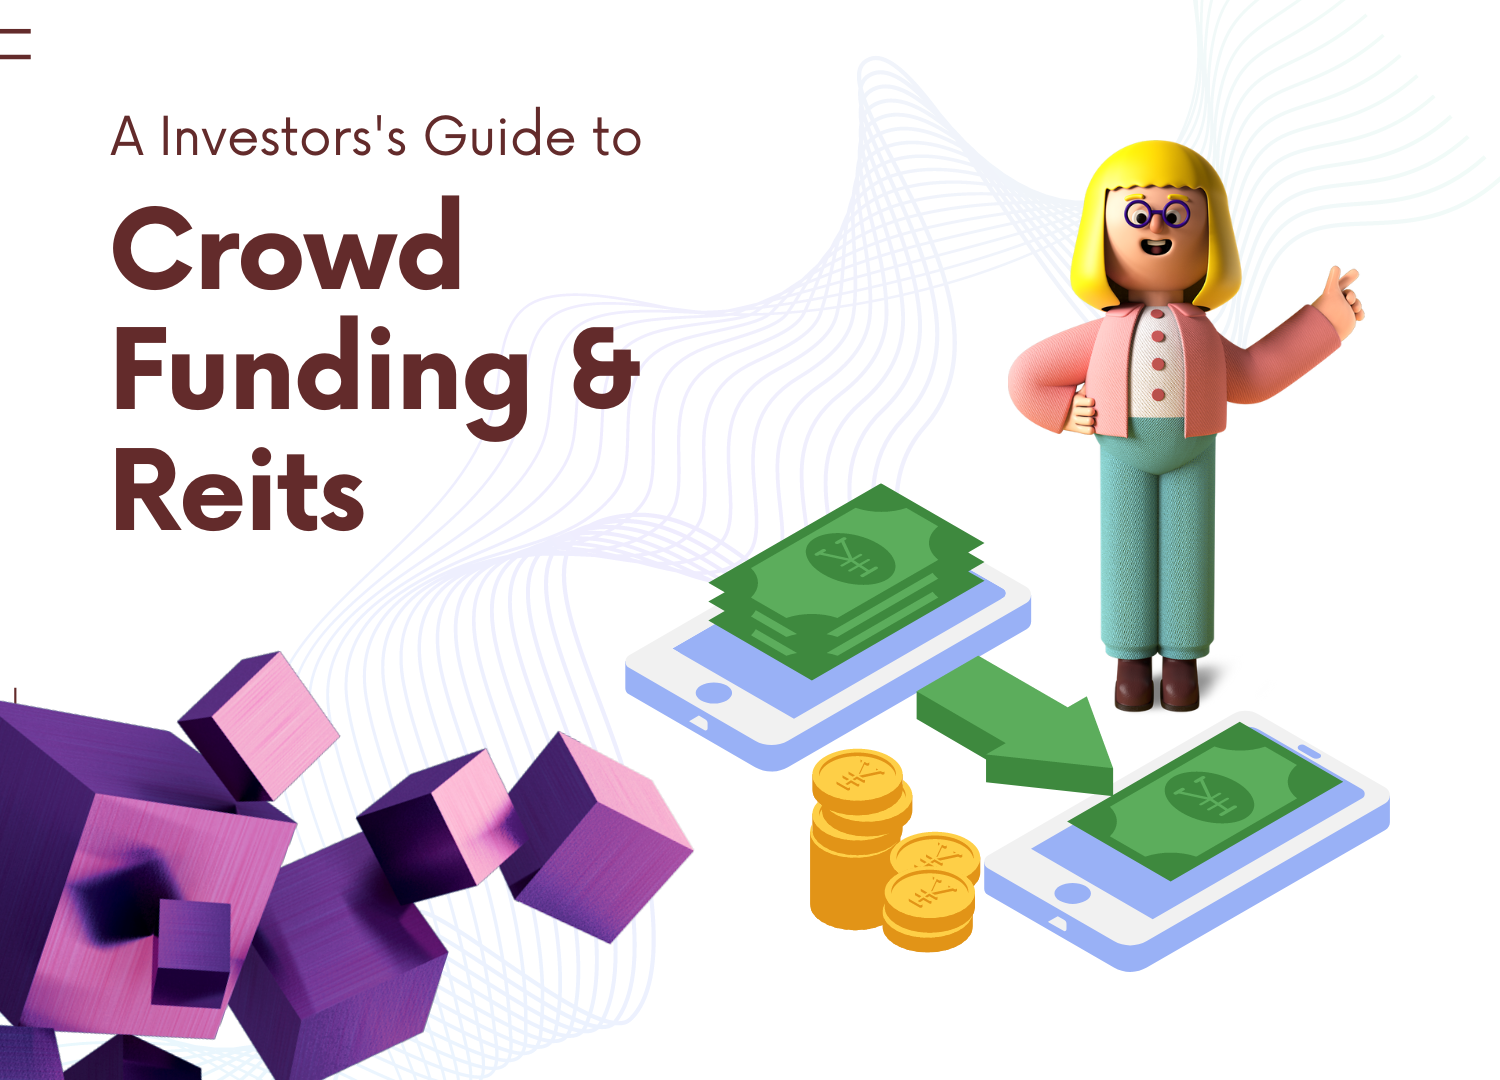 Small Investors Guide for Crowd funding & Reits